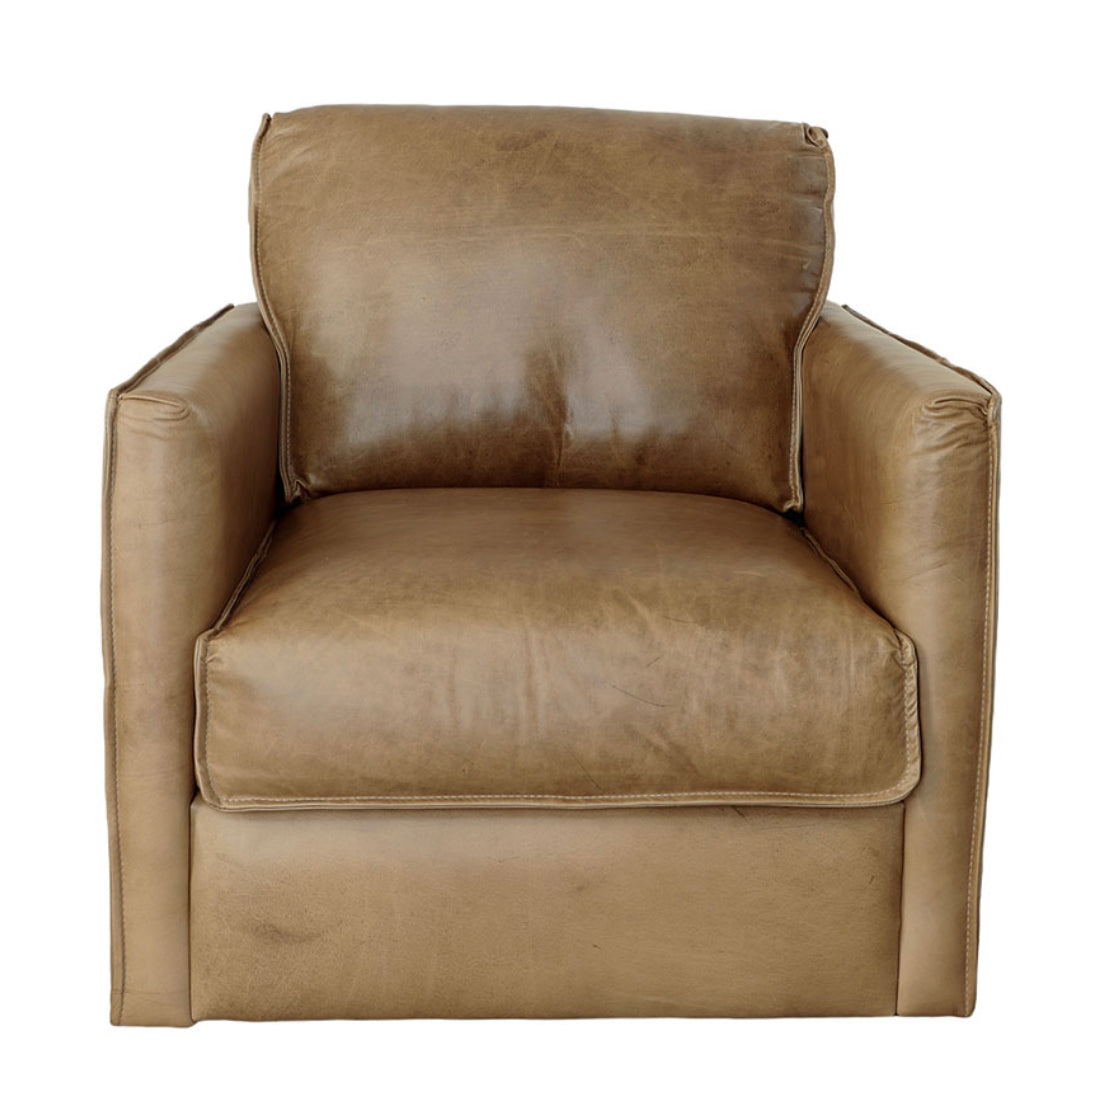 Bruno Brown Swivel Chair, Leather